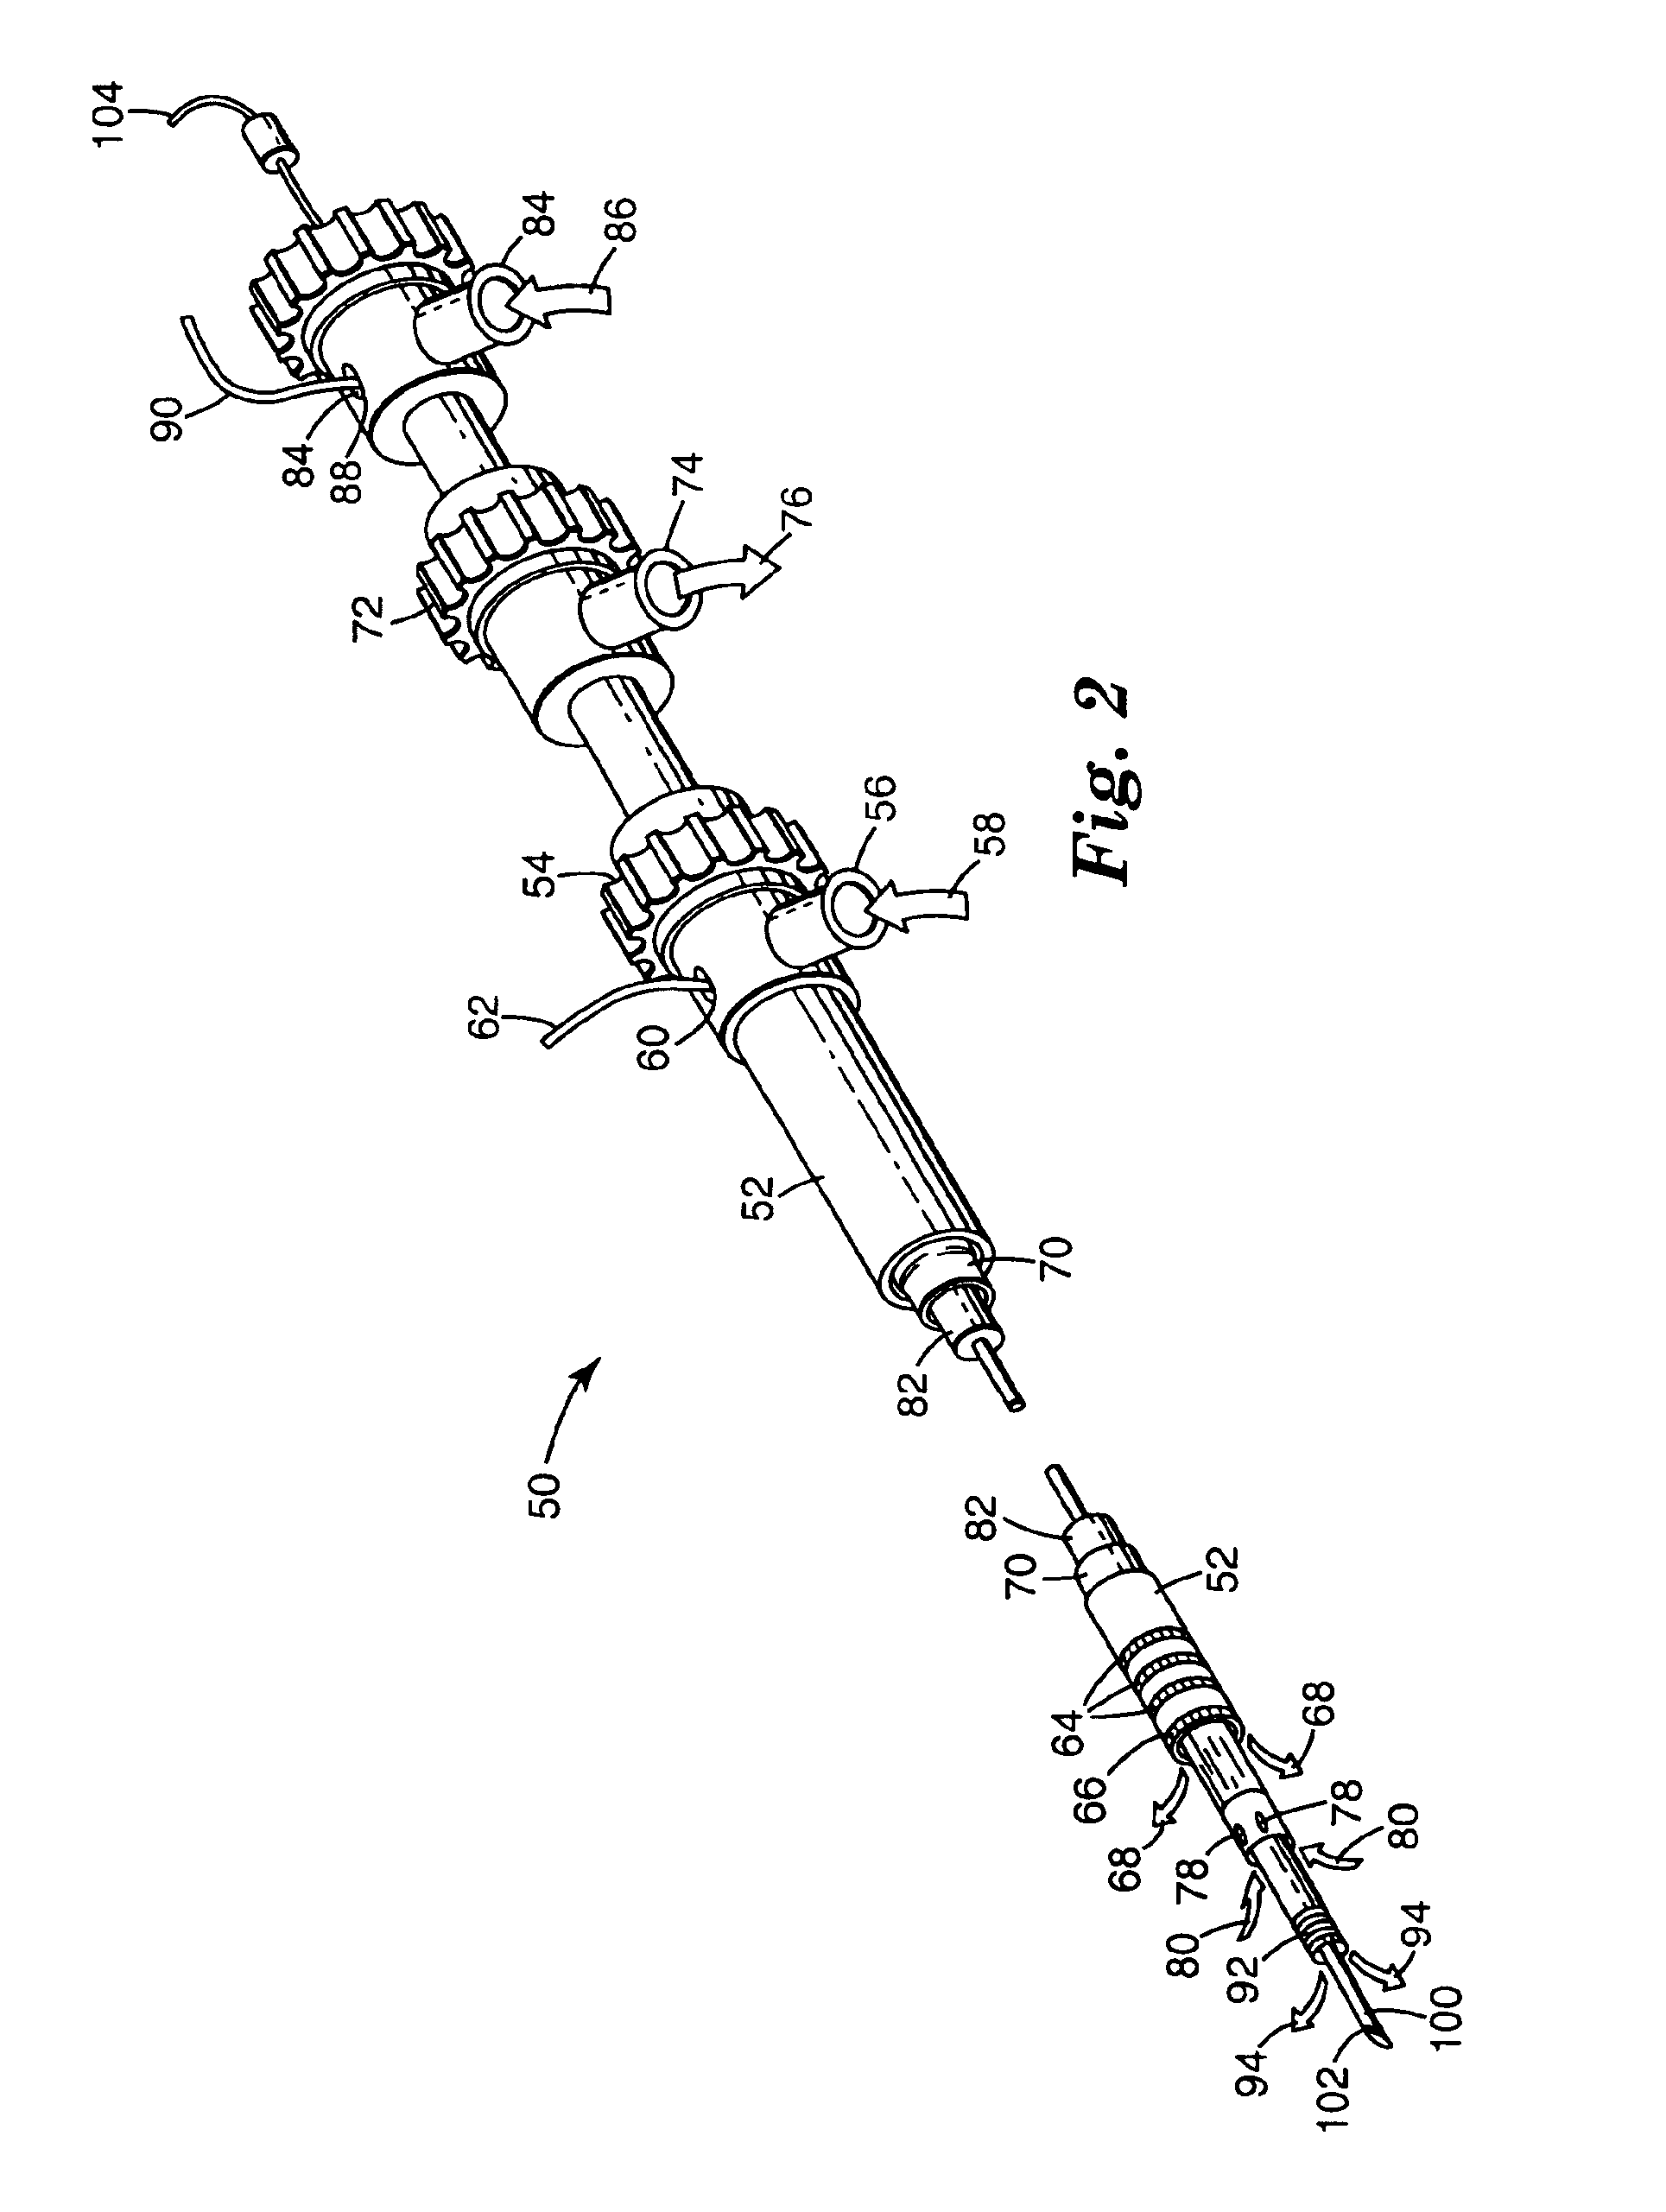 Method and apparatus for creating a bi-polar virtual electrode used for the ablation of tissue